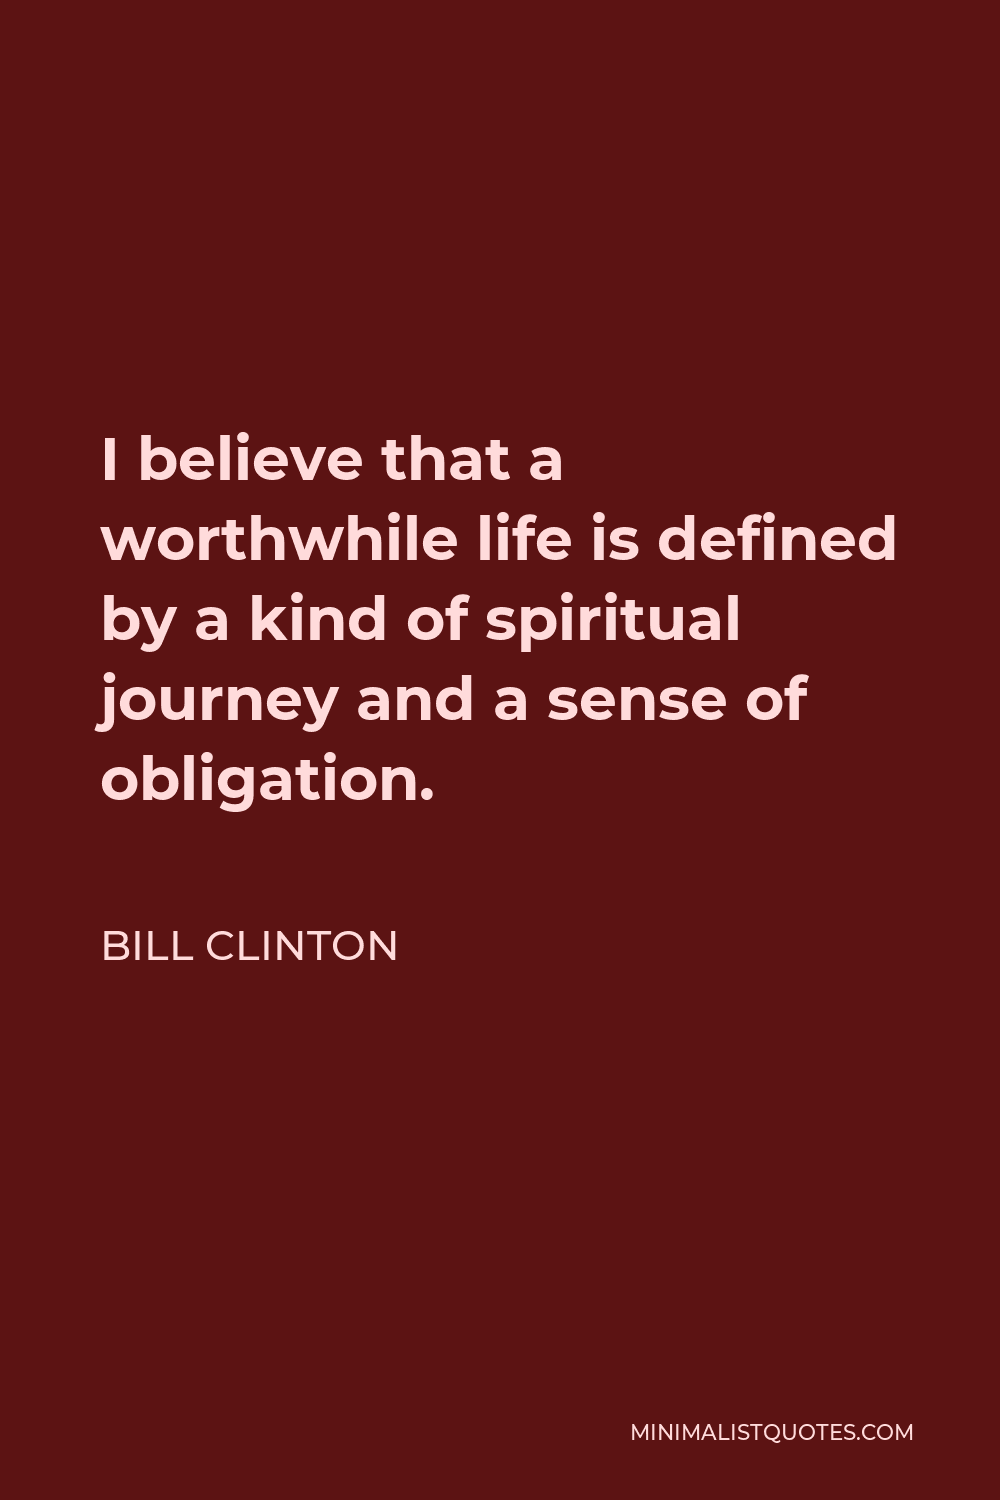 Bill Clinton Quote - I believe that a worthwhile life is defined by a kind of spiritual journey and a sense of obligation.